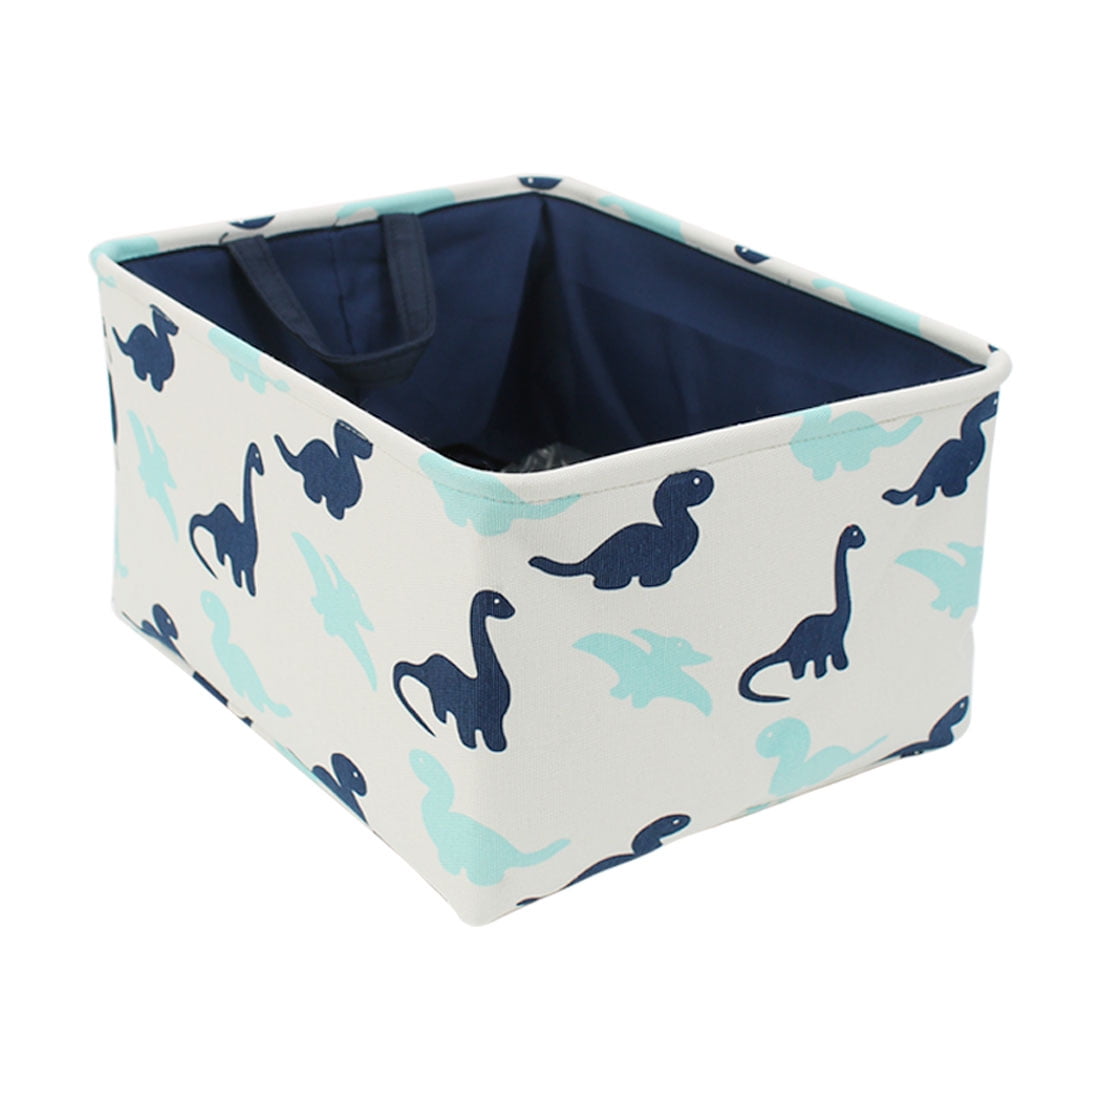 Foldable Fabric Storage Bins Basket Container with Handles Drawstring ...